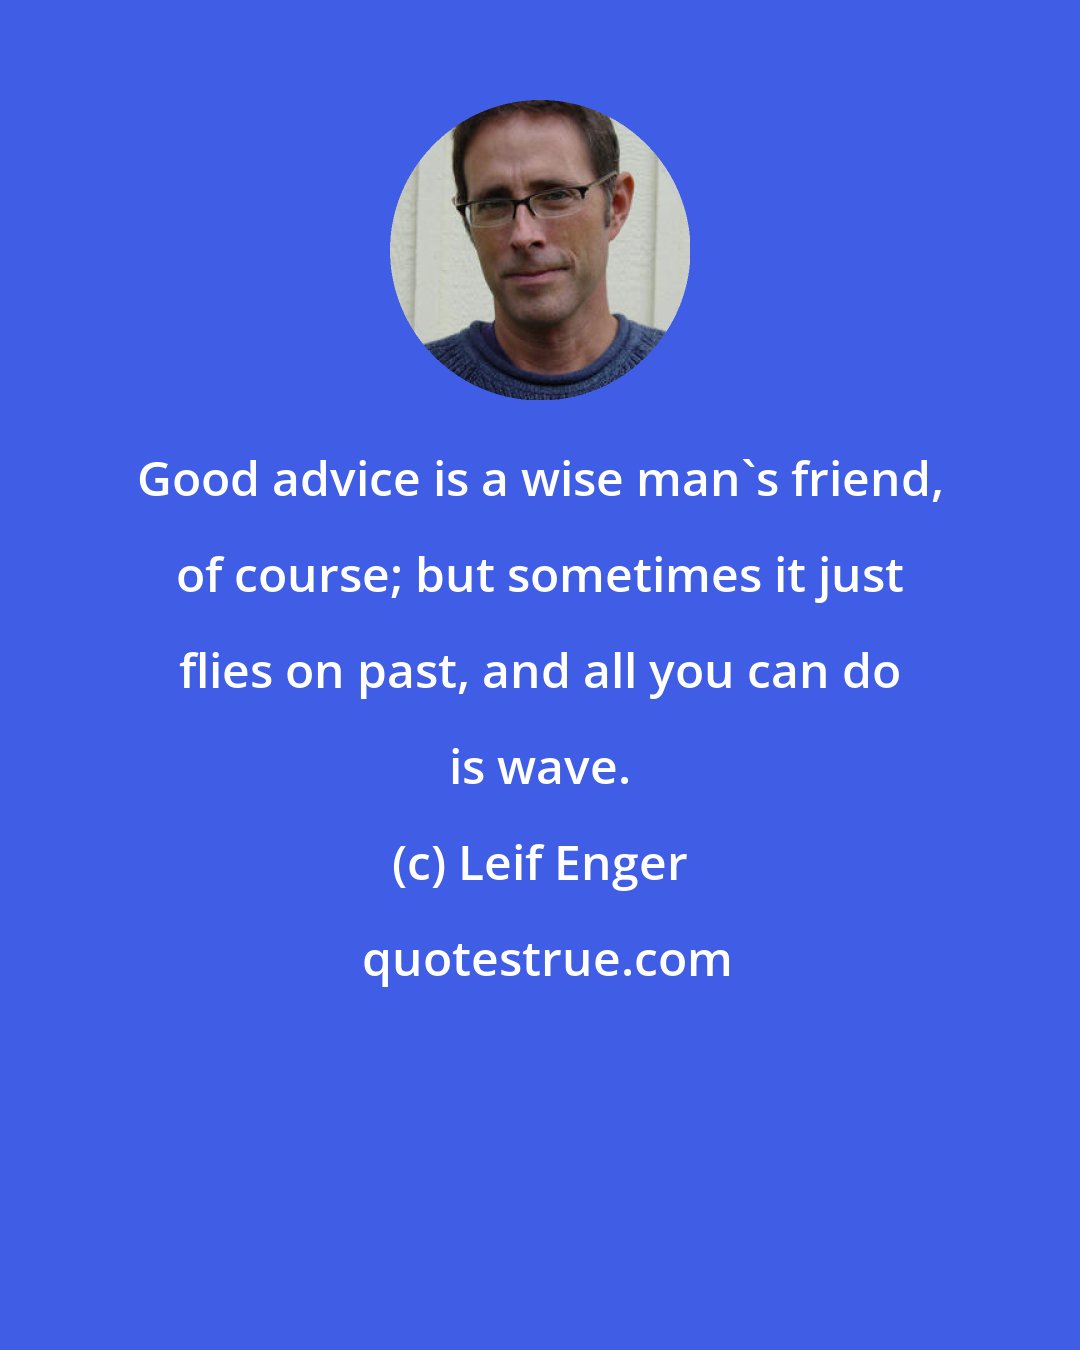 Leif Enger: Good advice is a wise man's friend, of course; but sometimes it just flies on past, and all you can do is wave.